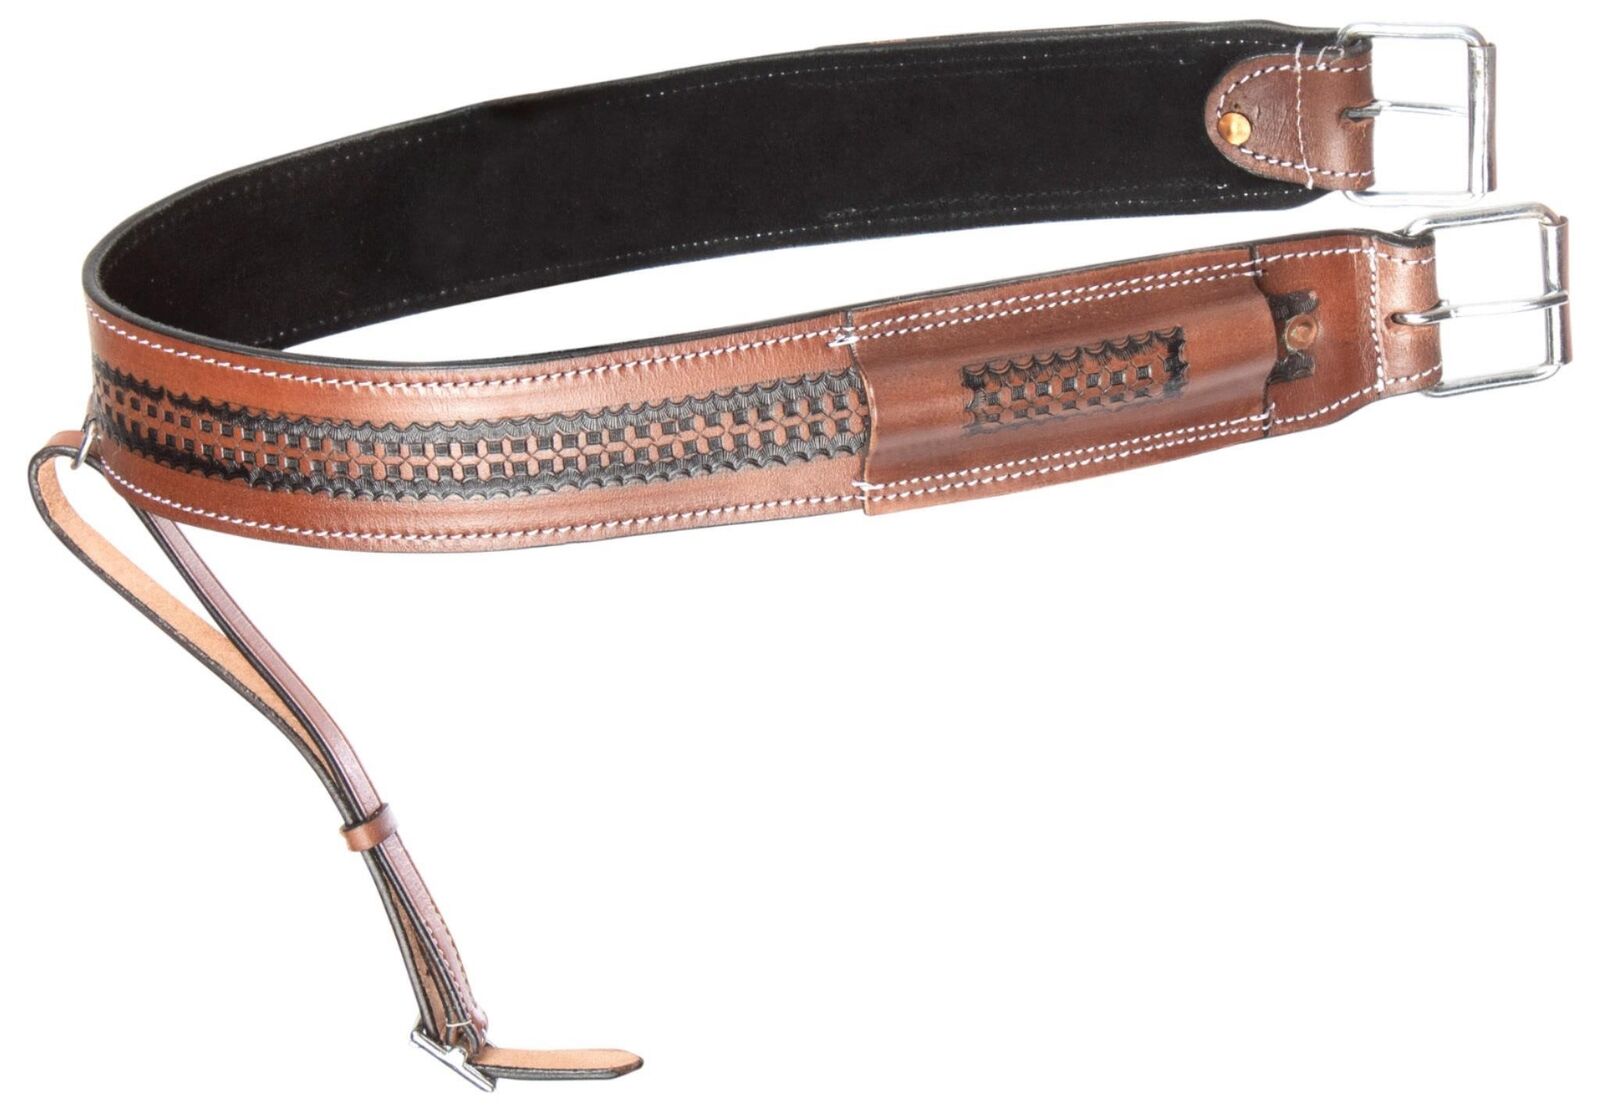 Western Horse Saddle Antique Oil Leather Rear Cinch Flank Strap